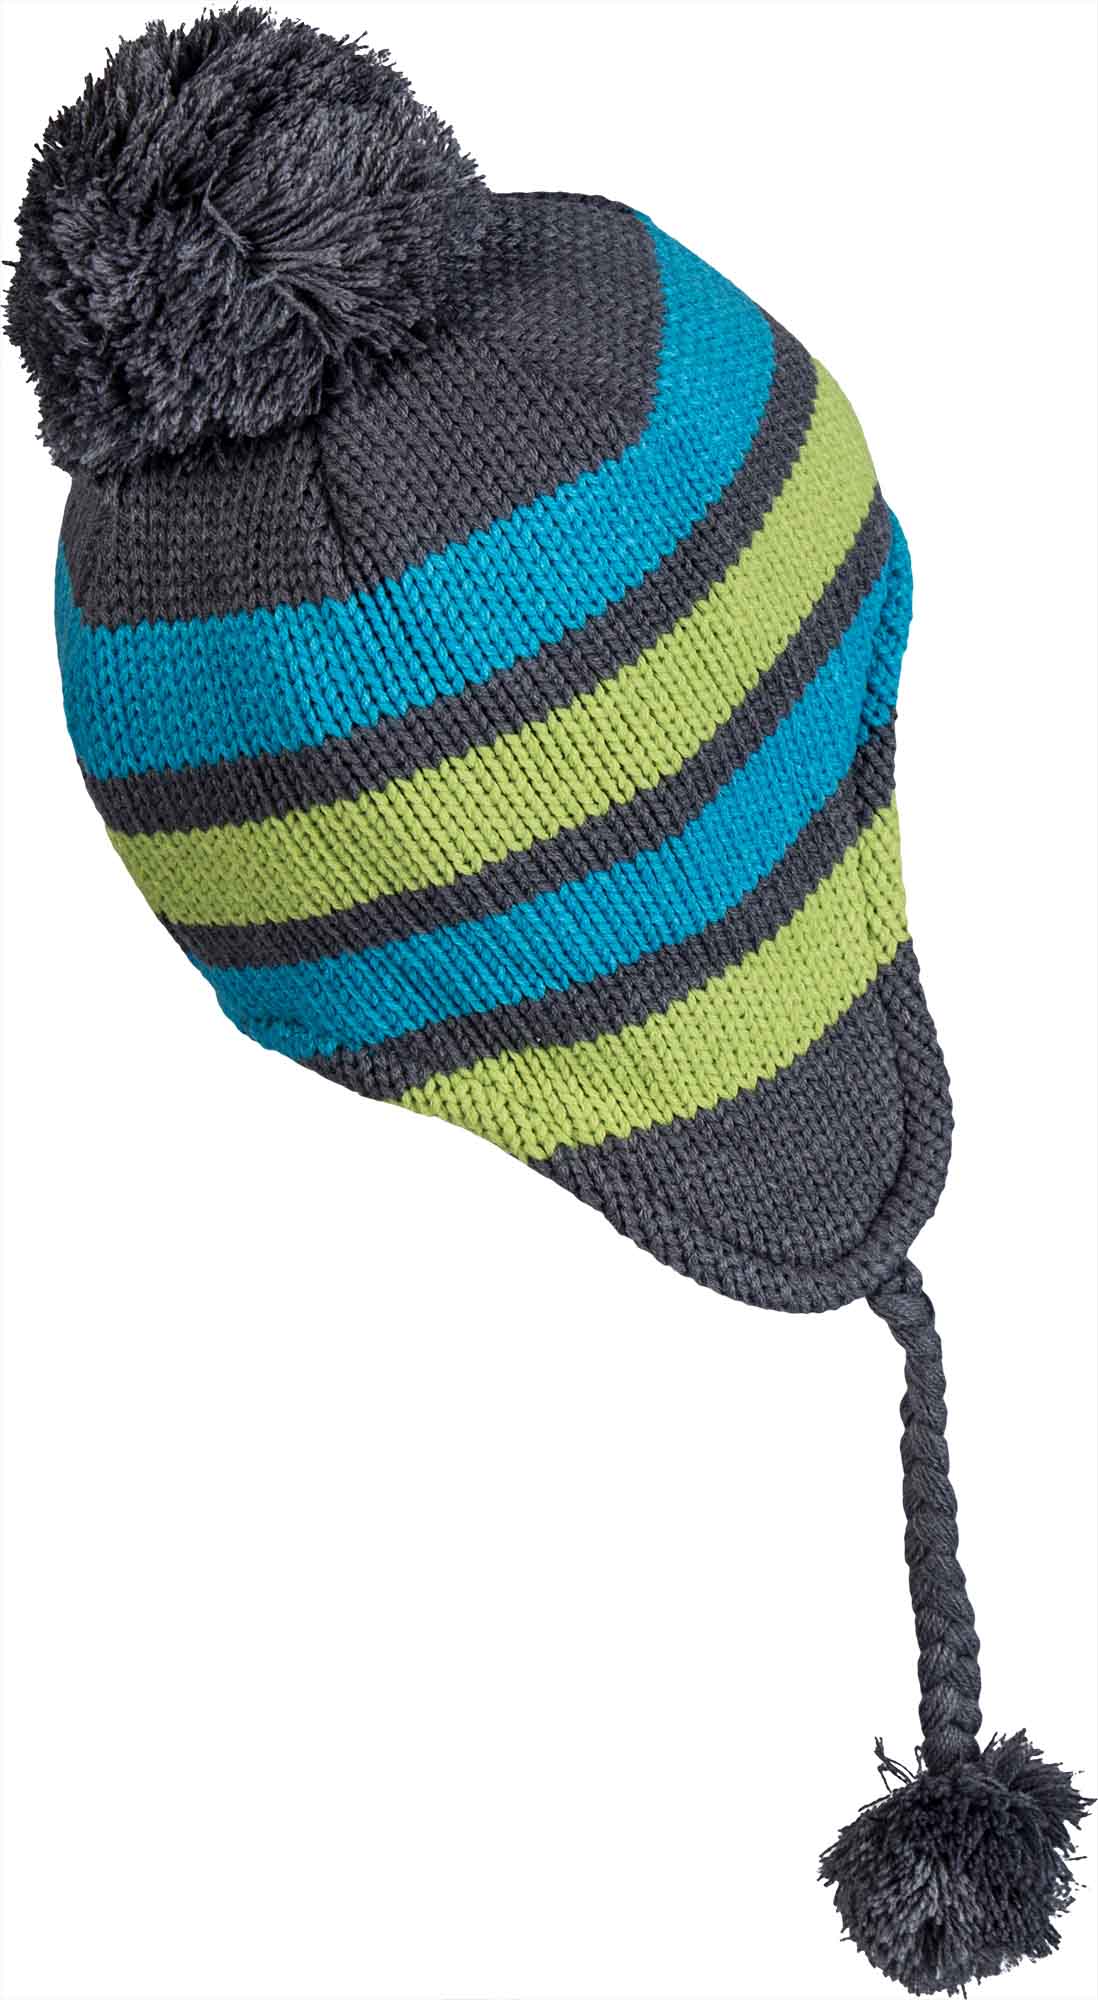 Kids’ knitted hat